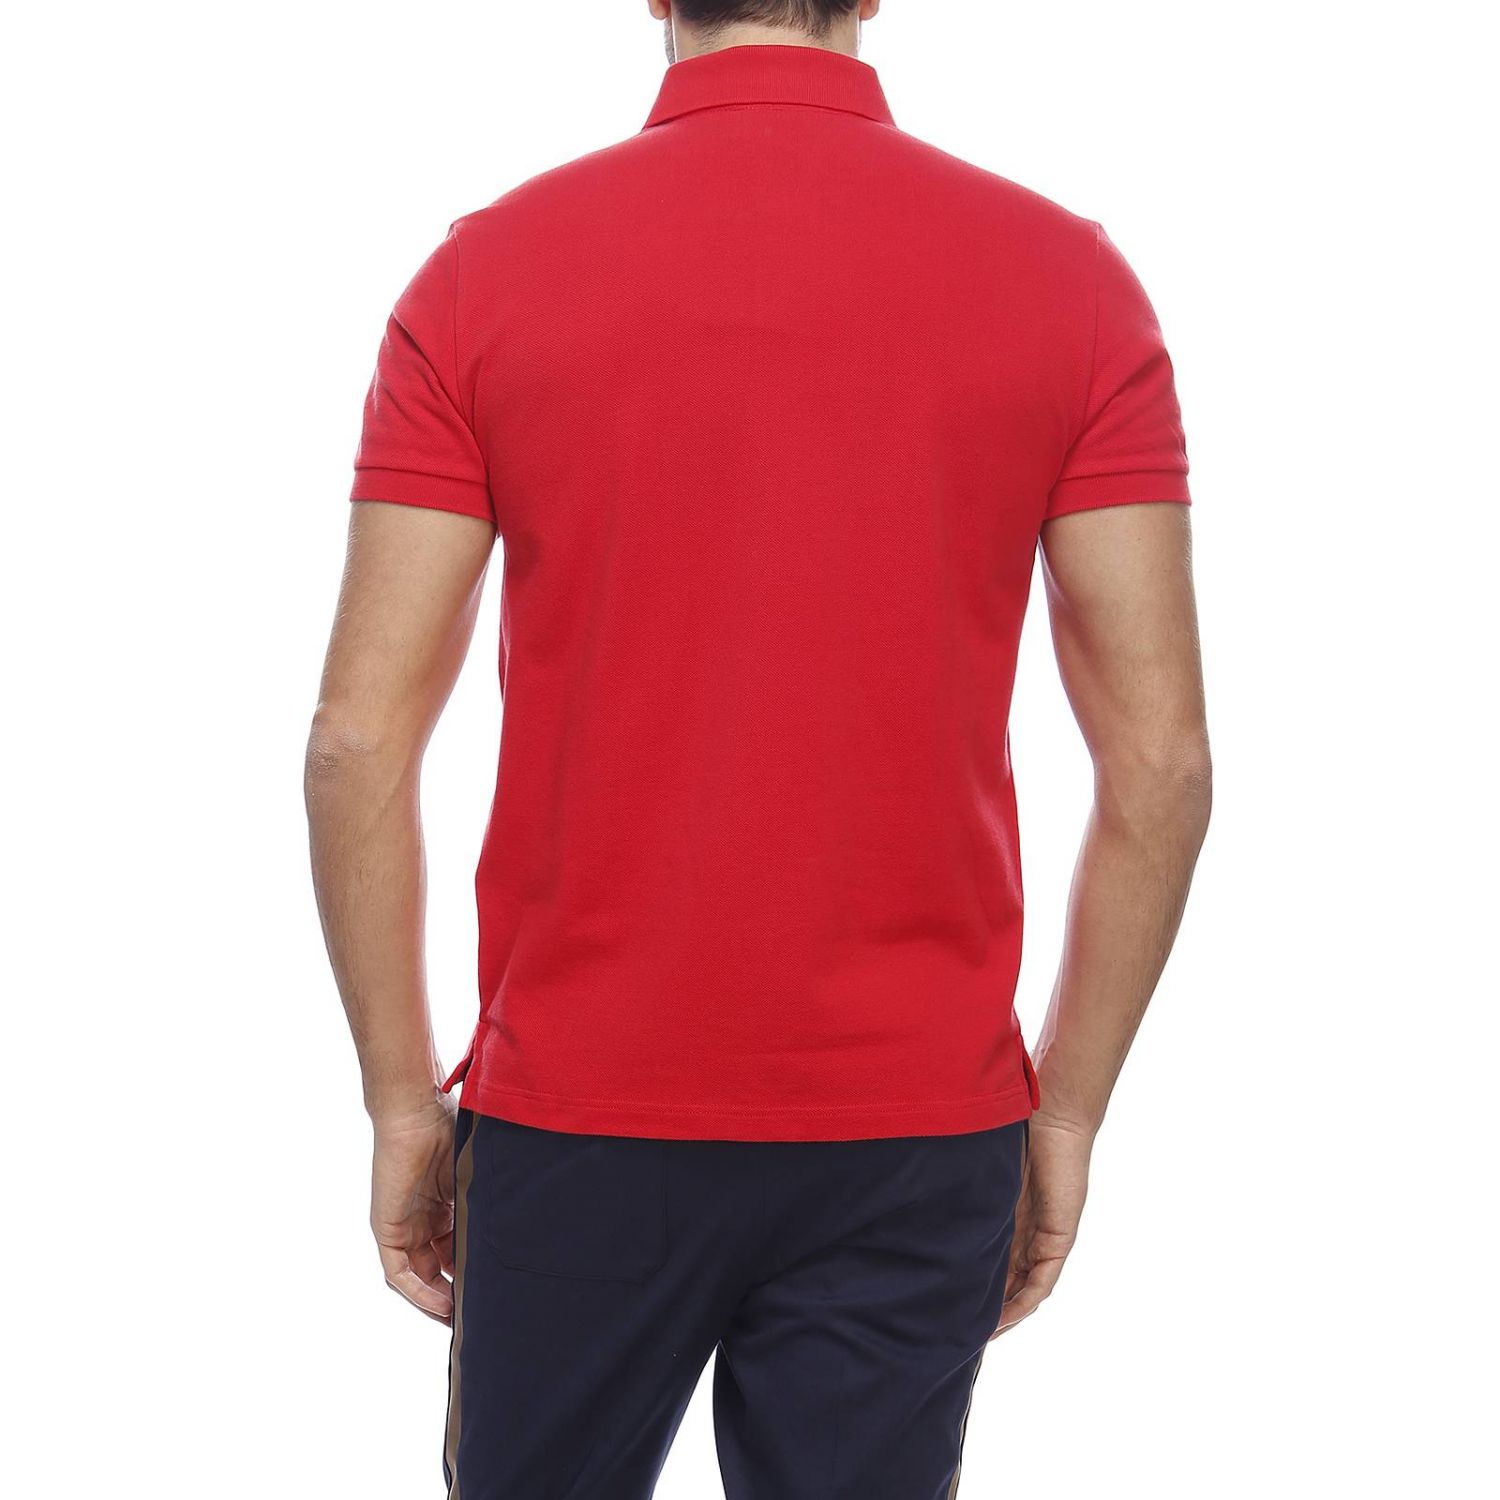 Etro Outlet: t-shirt for men - Red | Etro t-shirt 1Y142 9480 online on ...